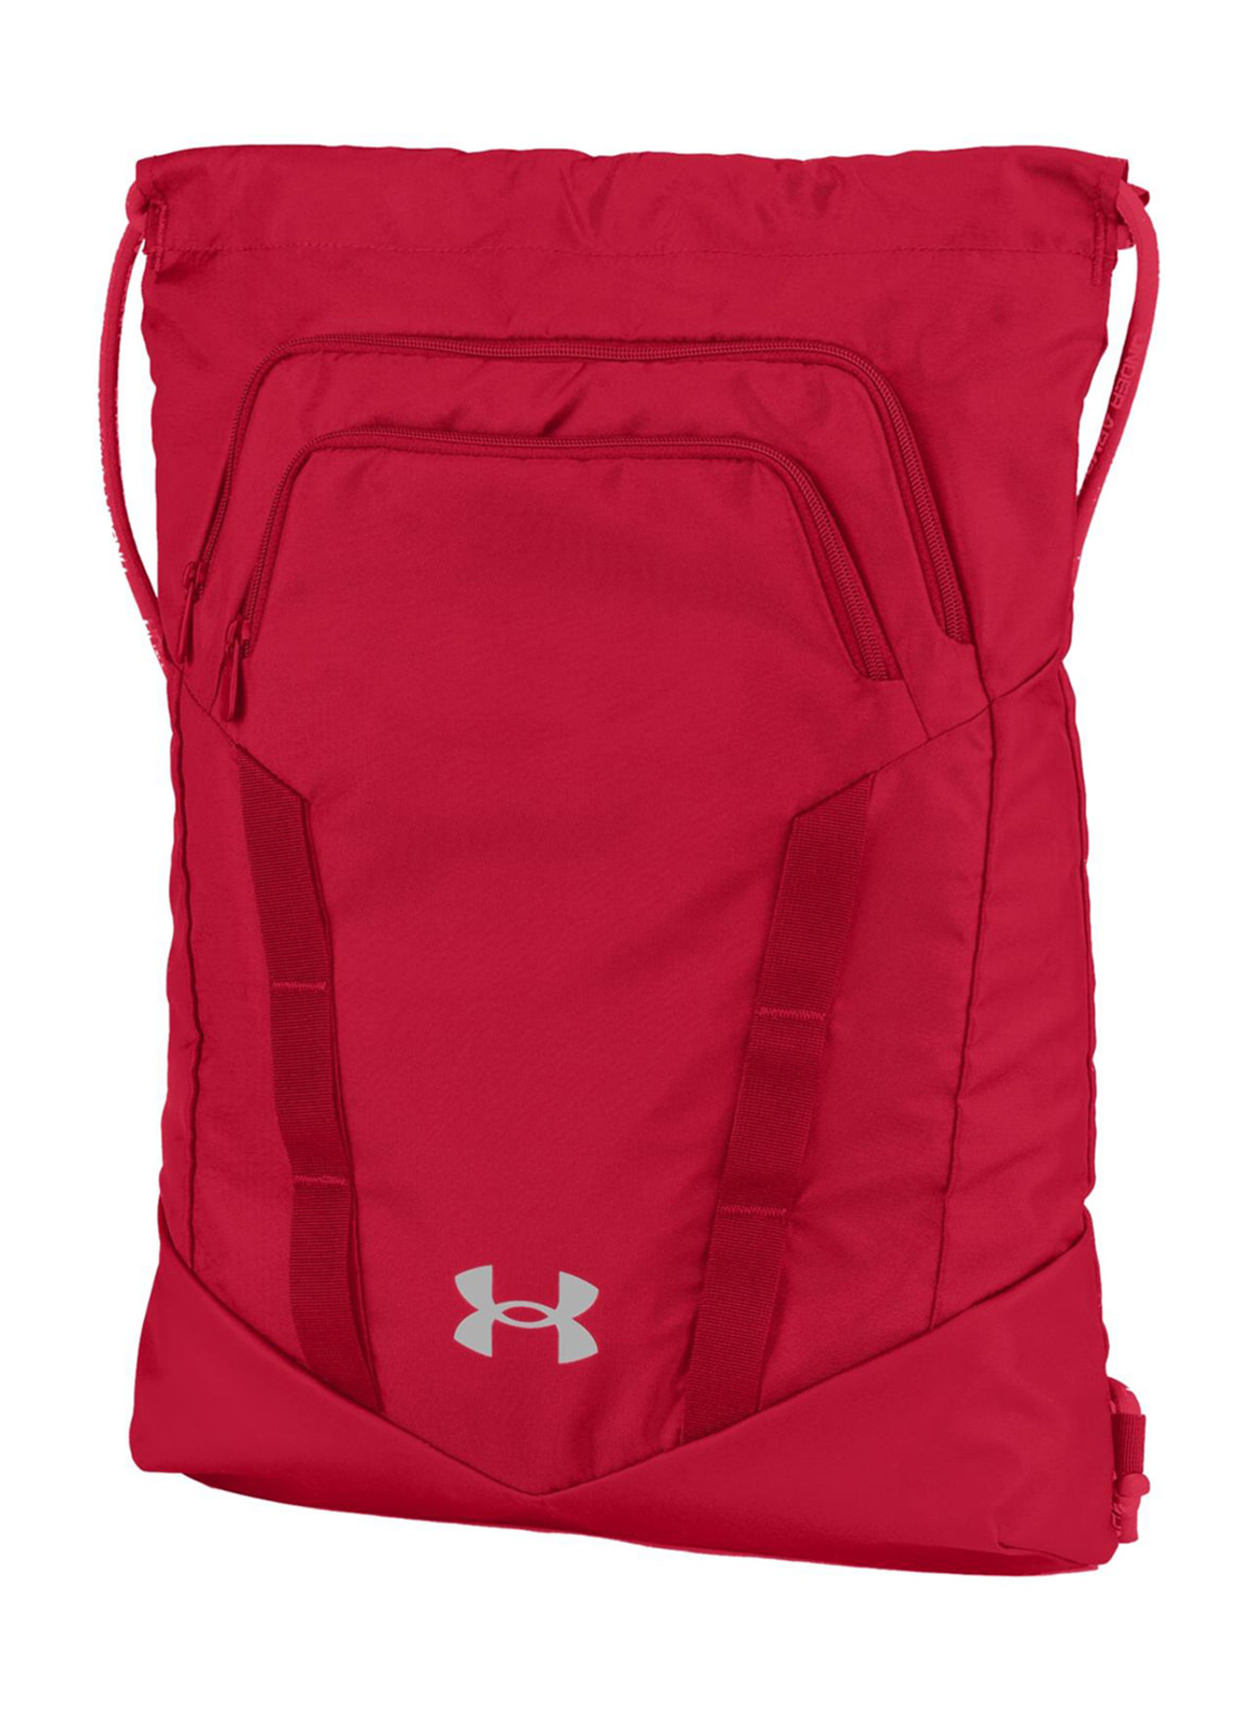 Under Armour Red Undeniable Sackpack 2.0